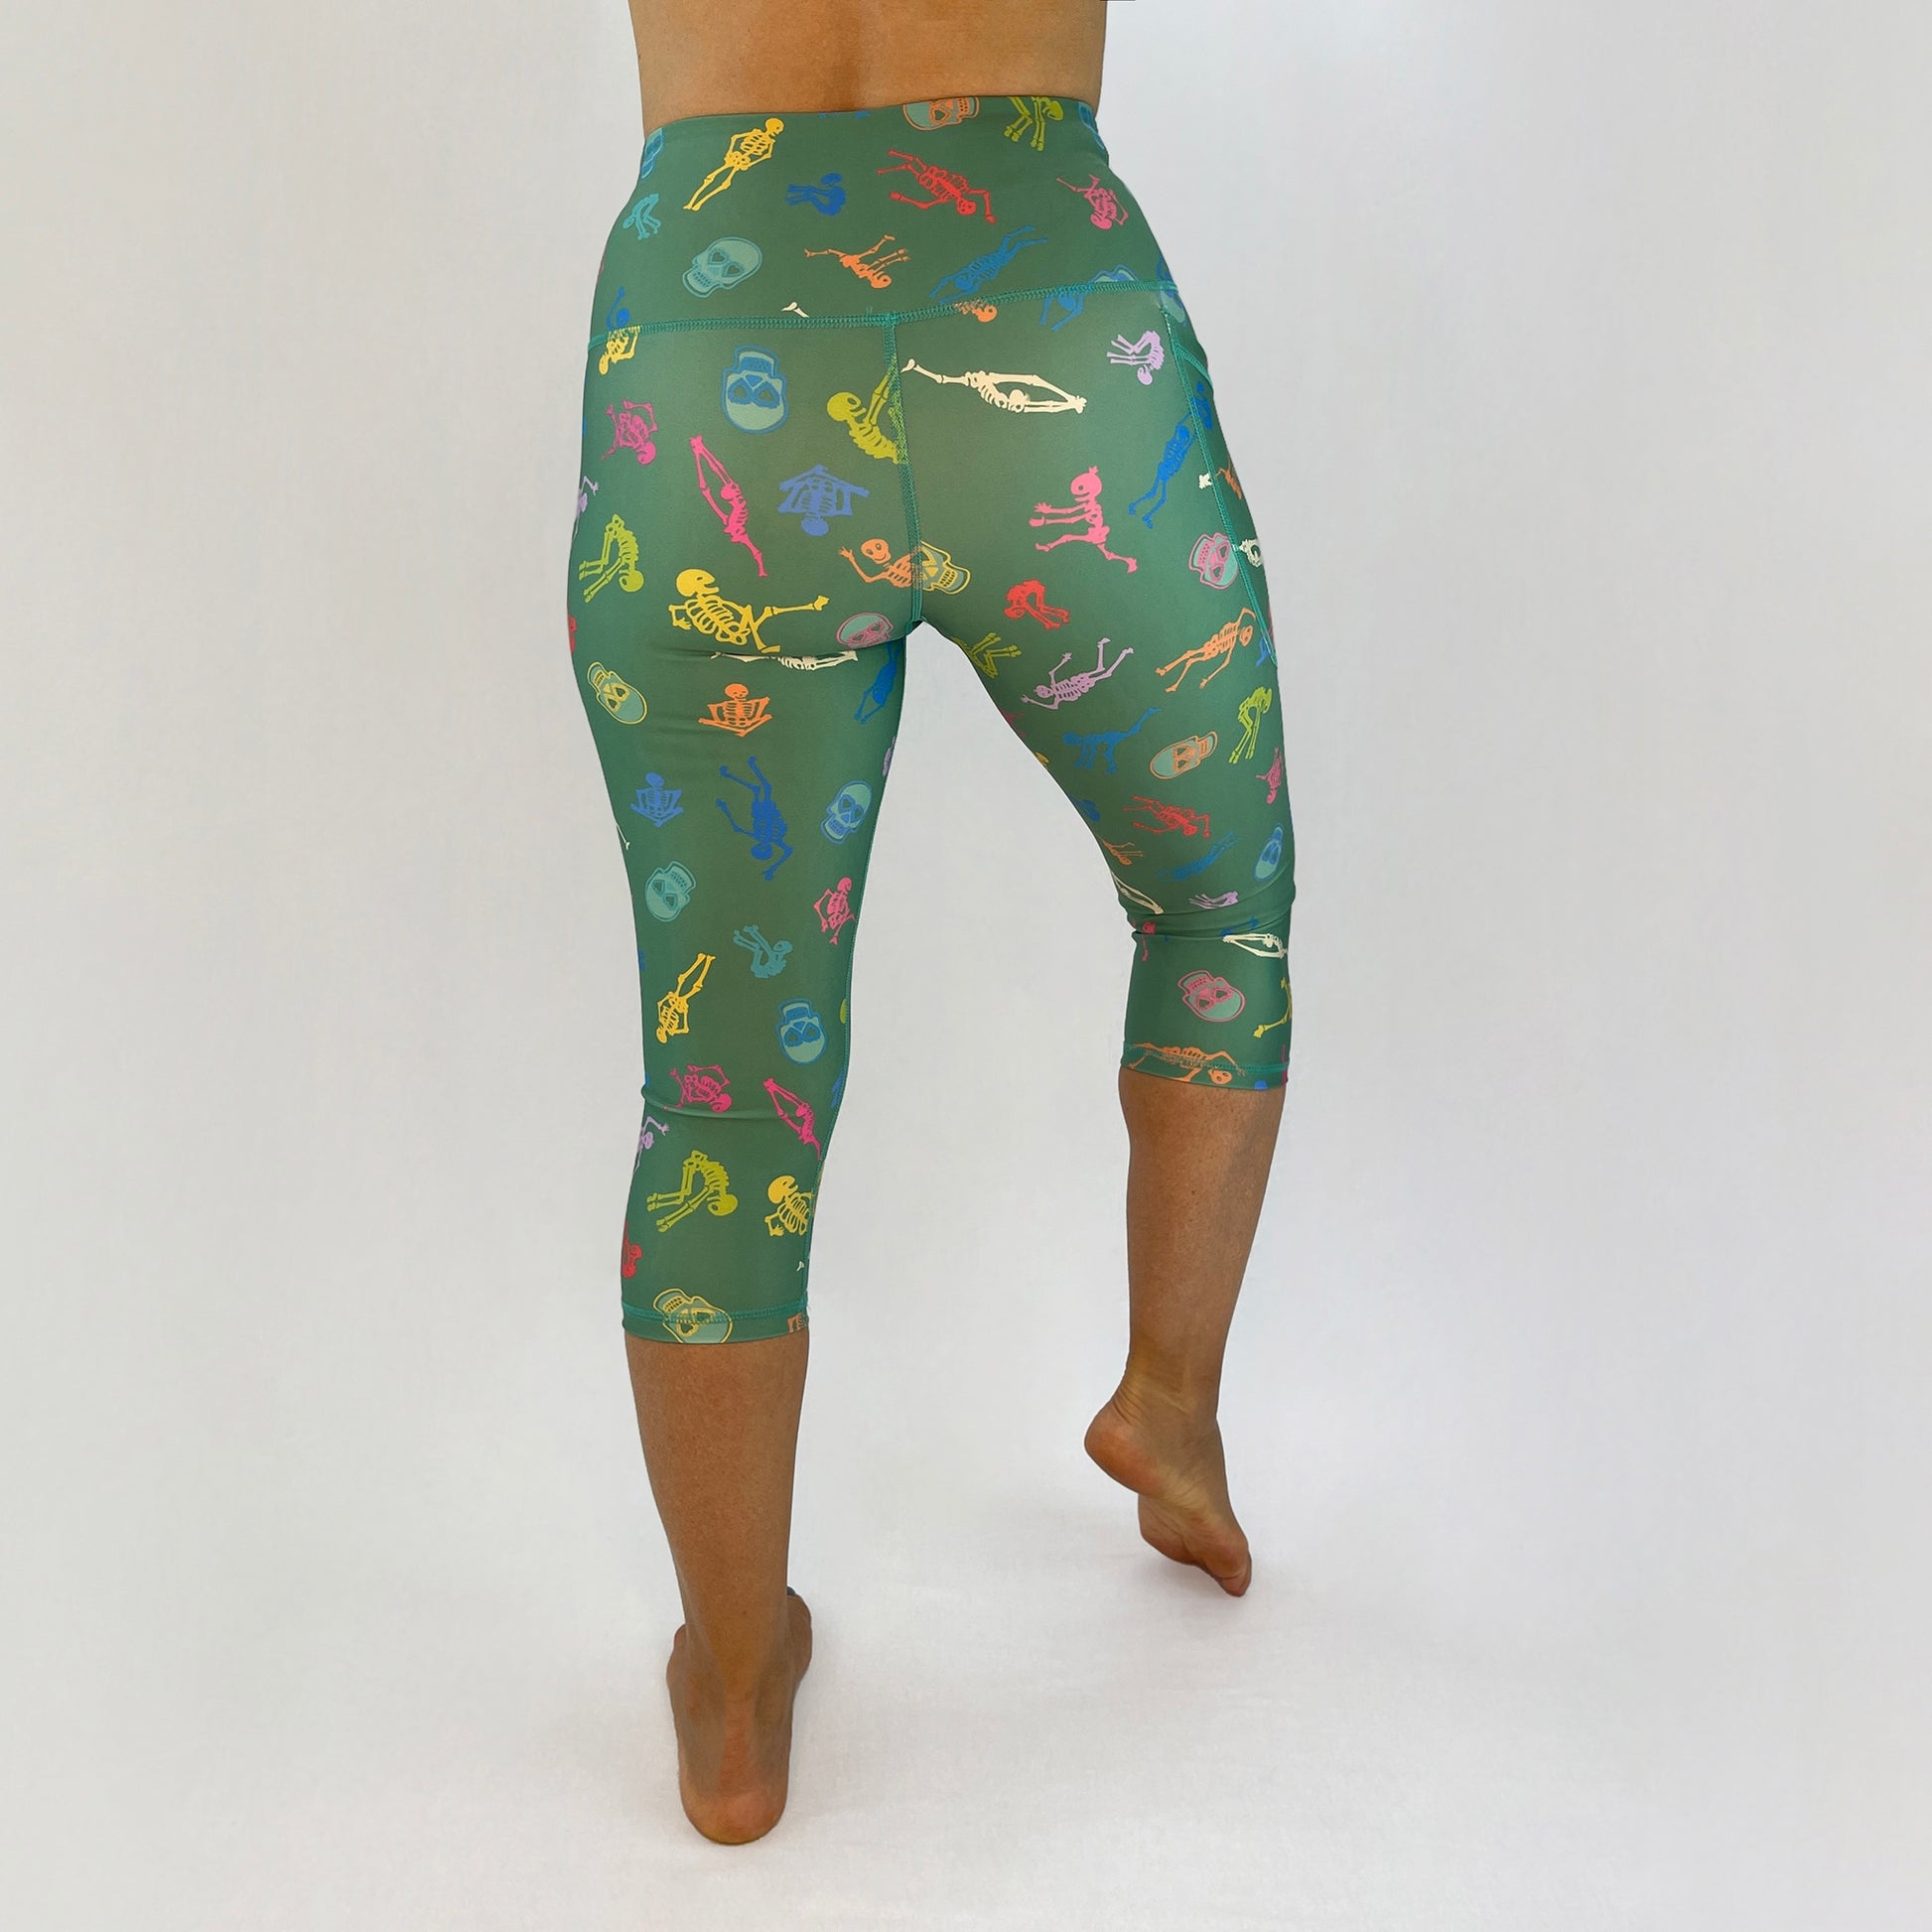 colourful high rise leggings with pockets made sustainably from recycled materials - skeletons and skulls back